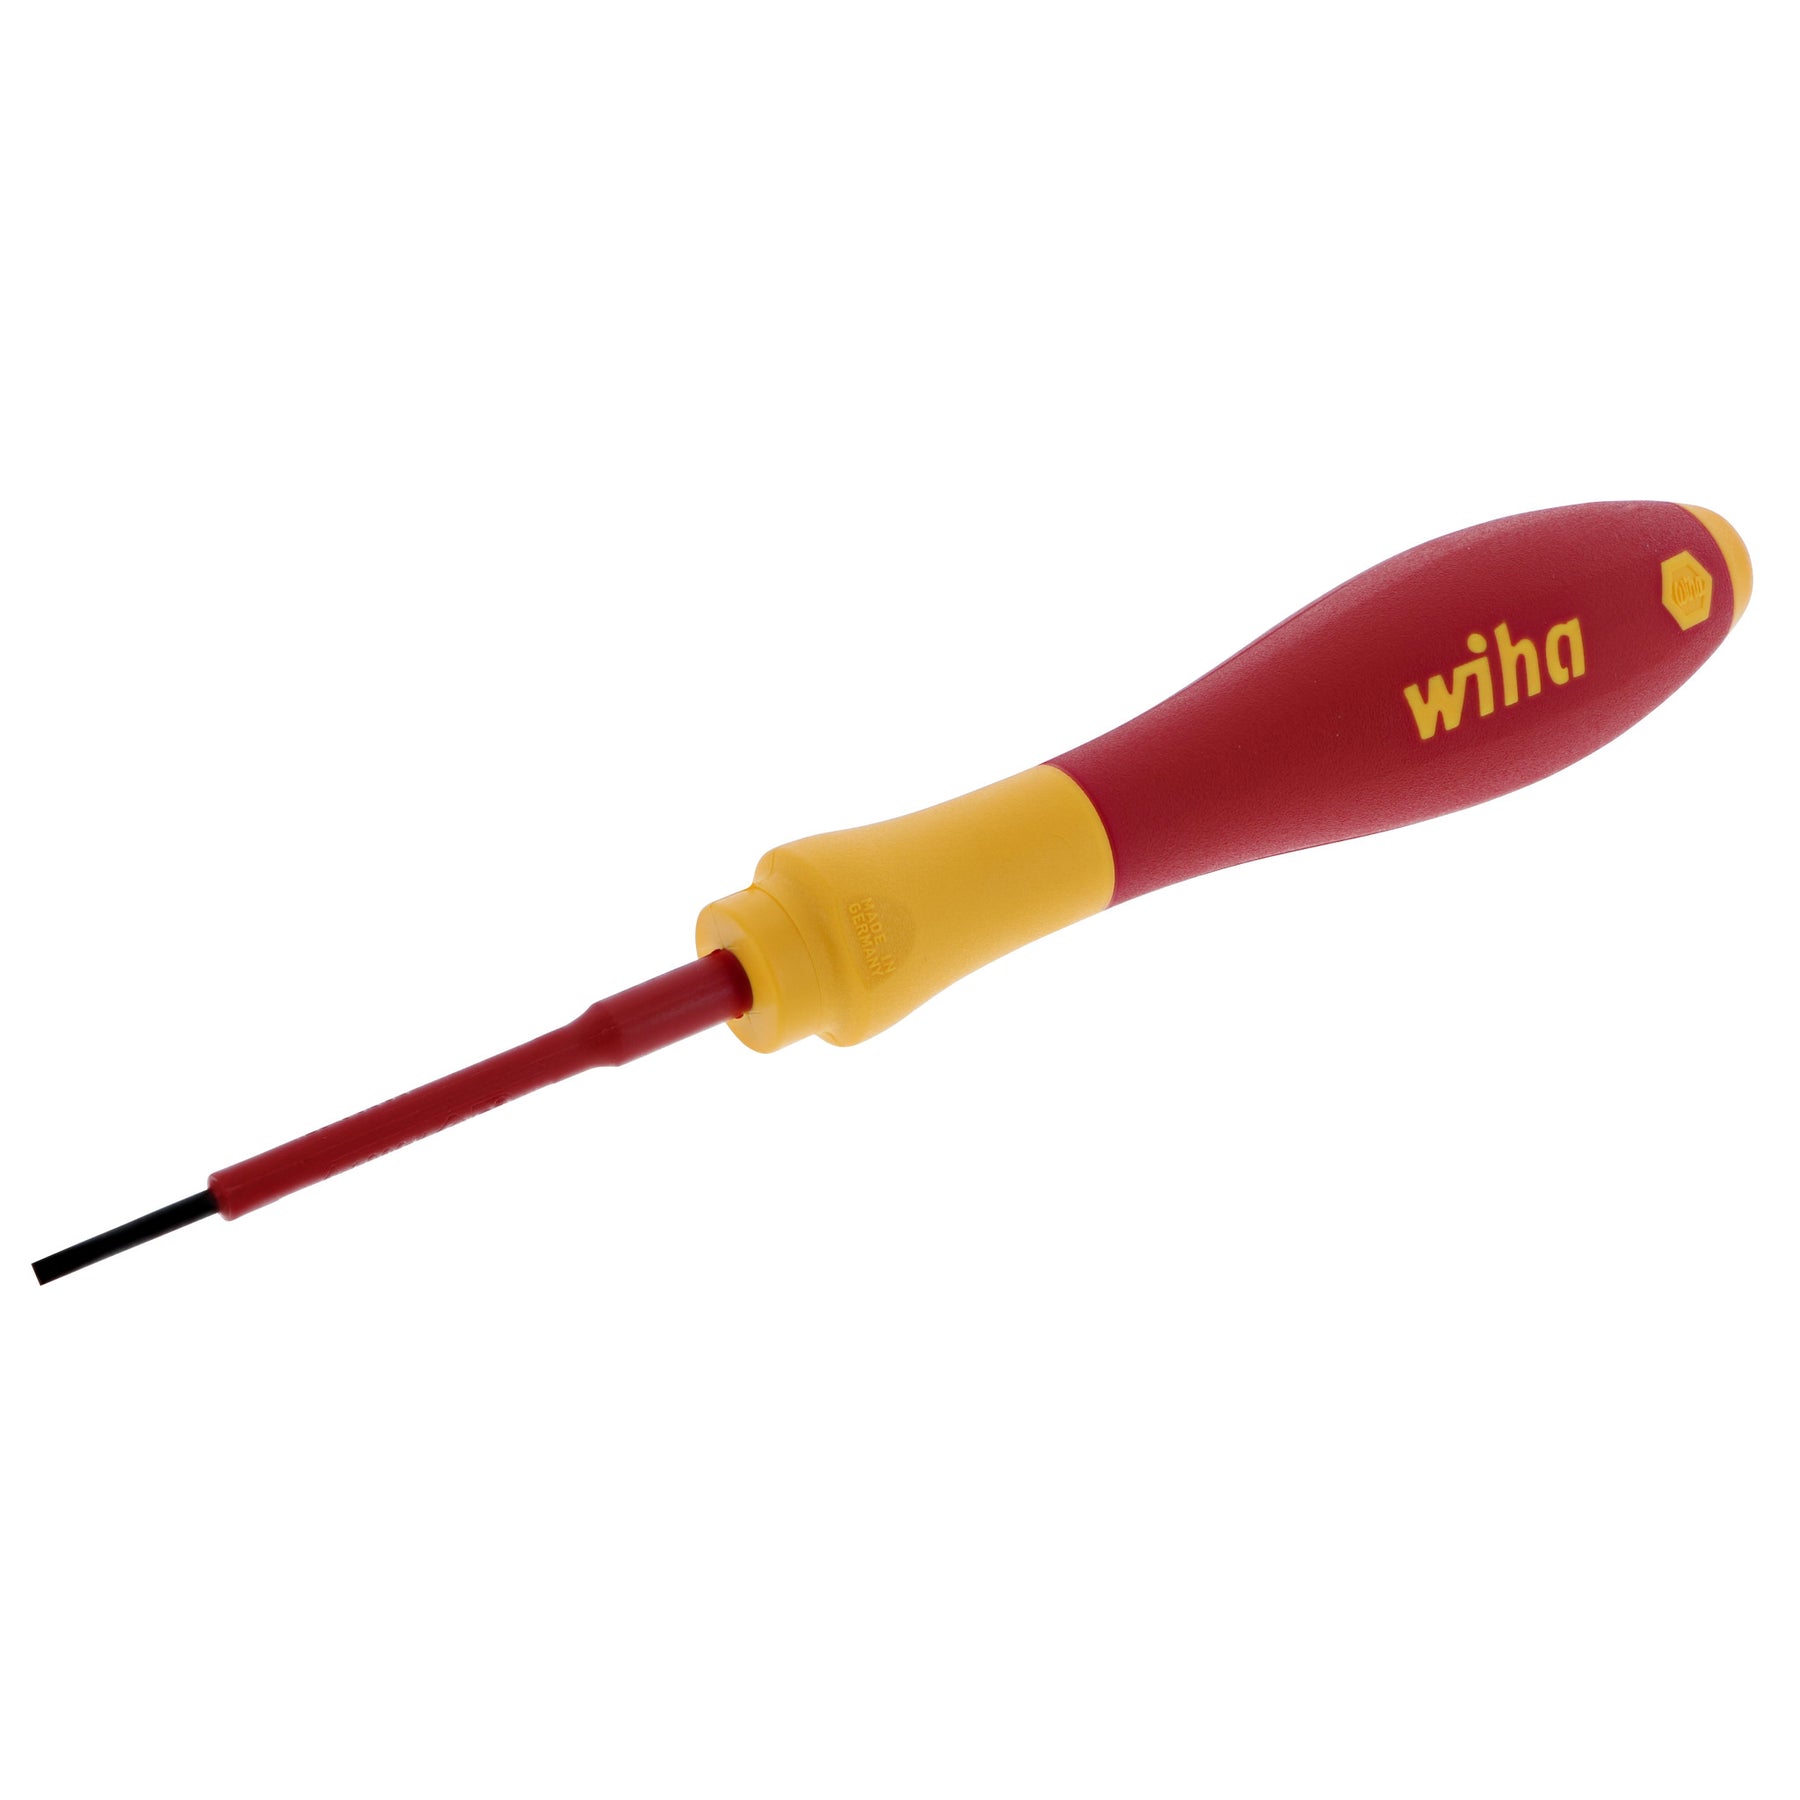 Wiha 32005 Insulated Slotted Screwdriver 2.0mm Made in Germany